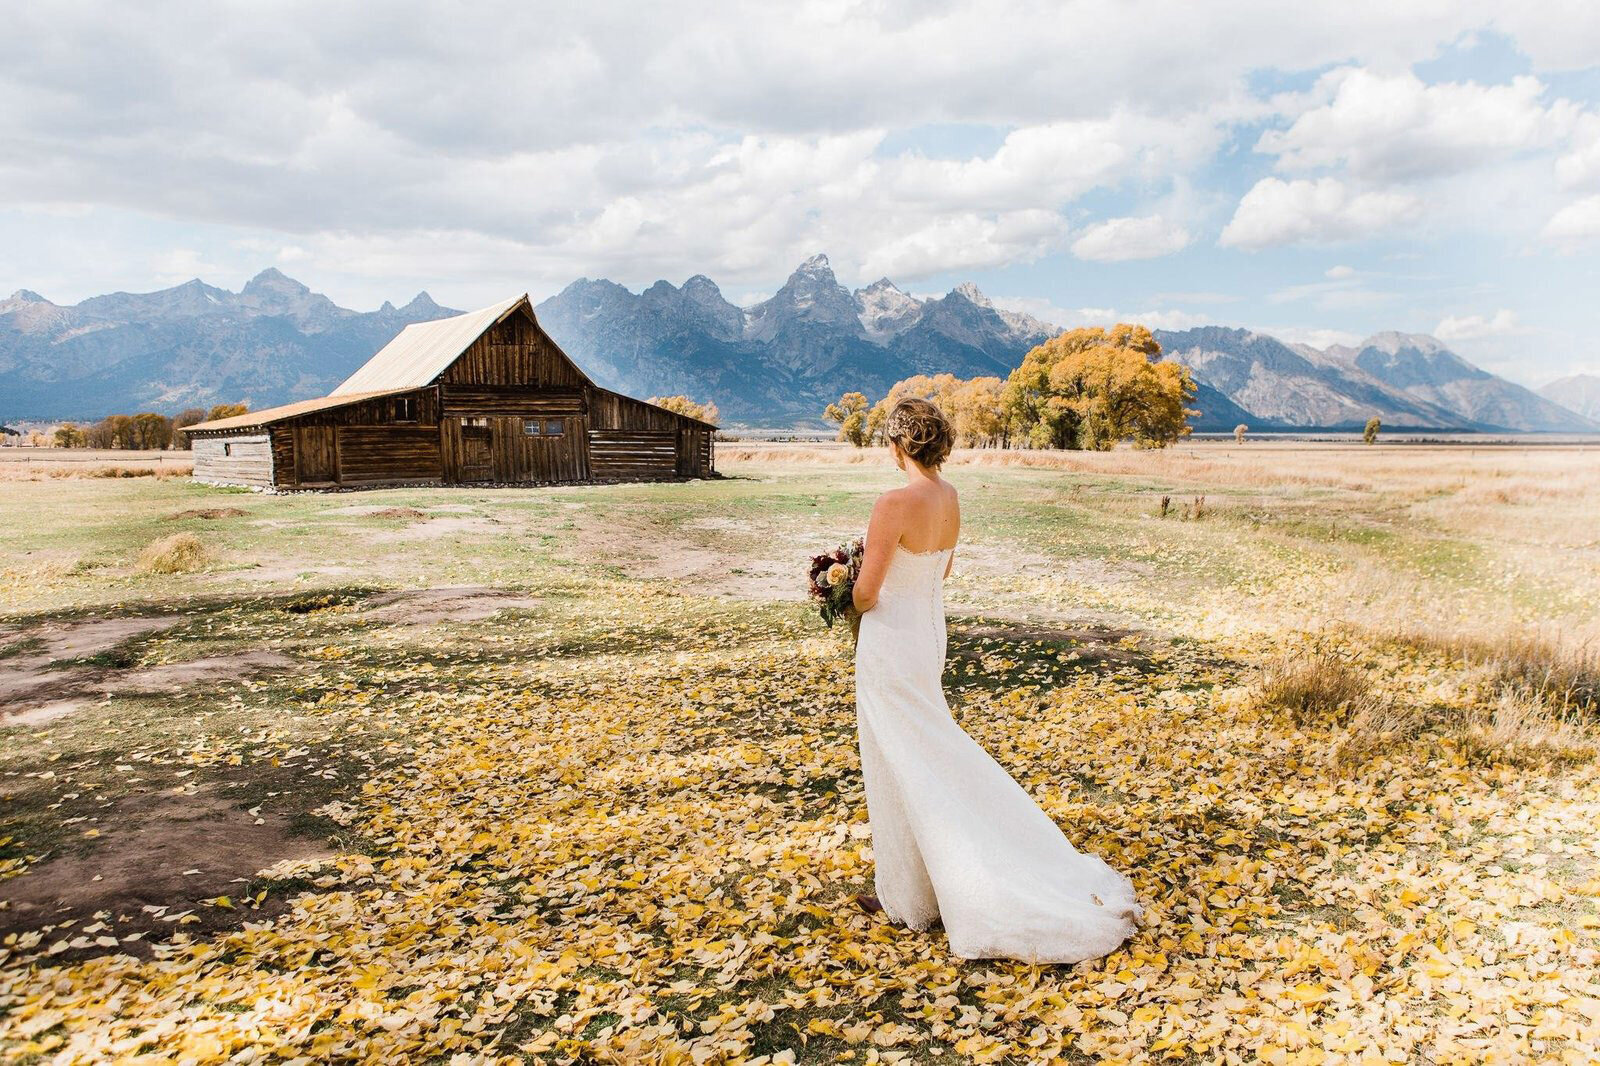 A bride takes in the views of the Moulton Barn in Grand Teton National Park surrounded by bright autumn leaves